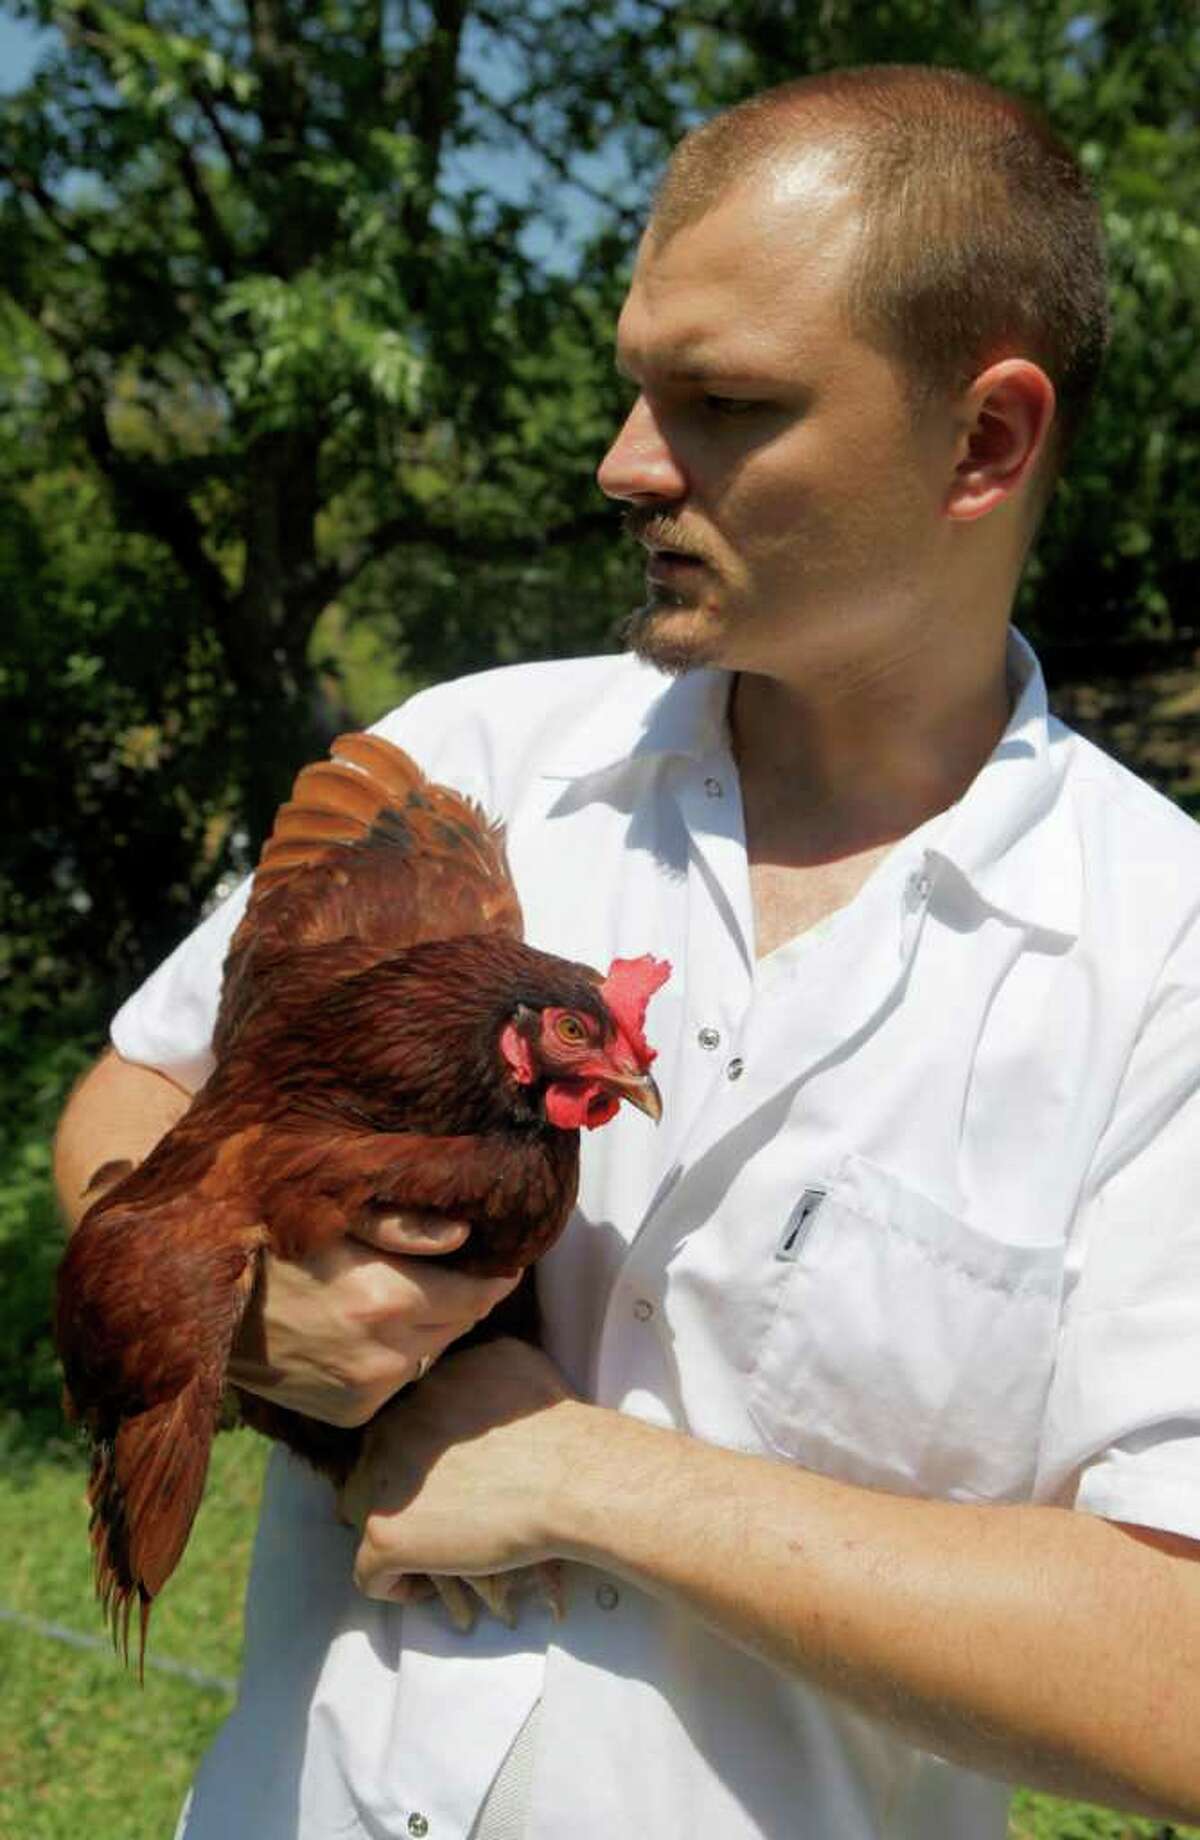 Michael Sohocki, Restaurant Gwendolyn owner and chef, holds one of the chickens he raises in his backyard. Sohocki, who gathers about six eggs a day, says he trusts the eggs because he knows where they come from.